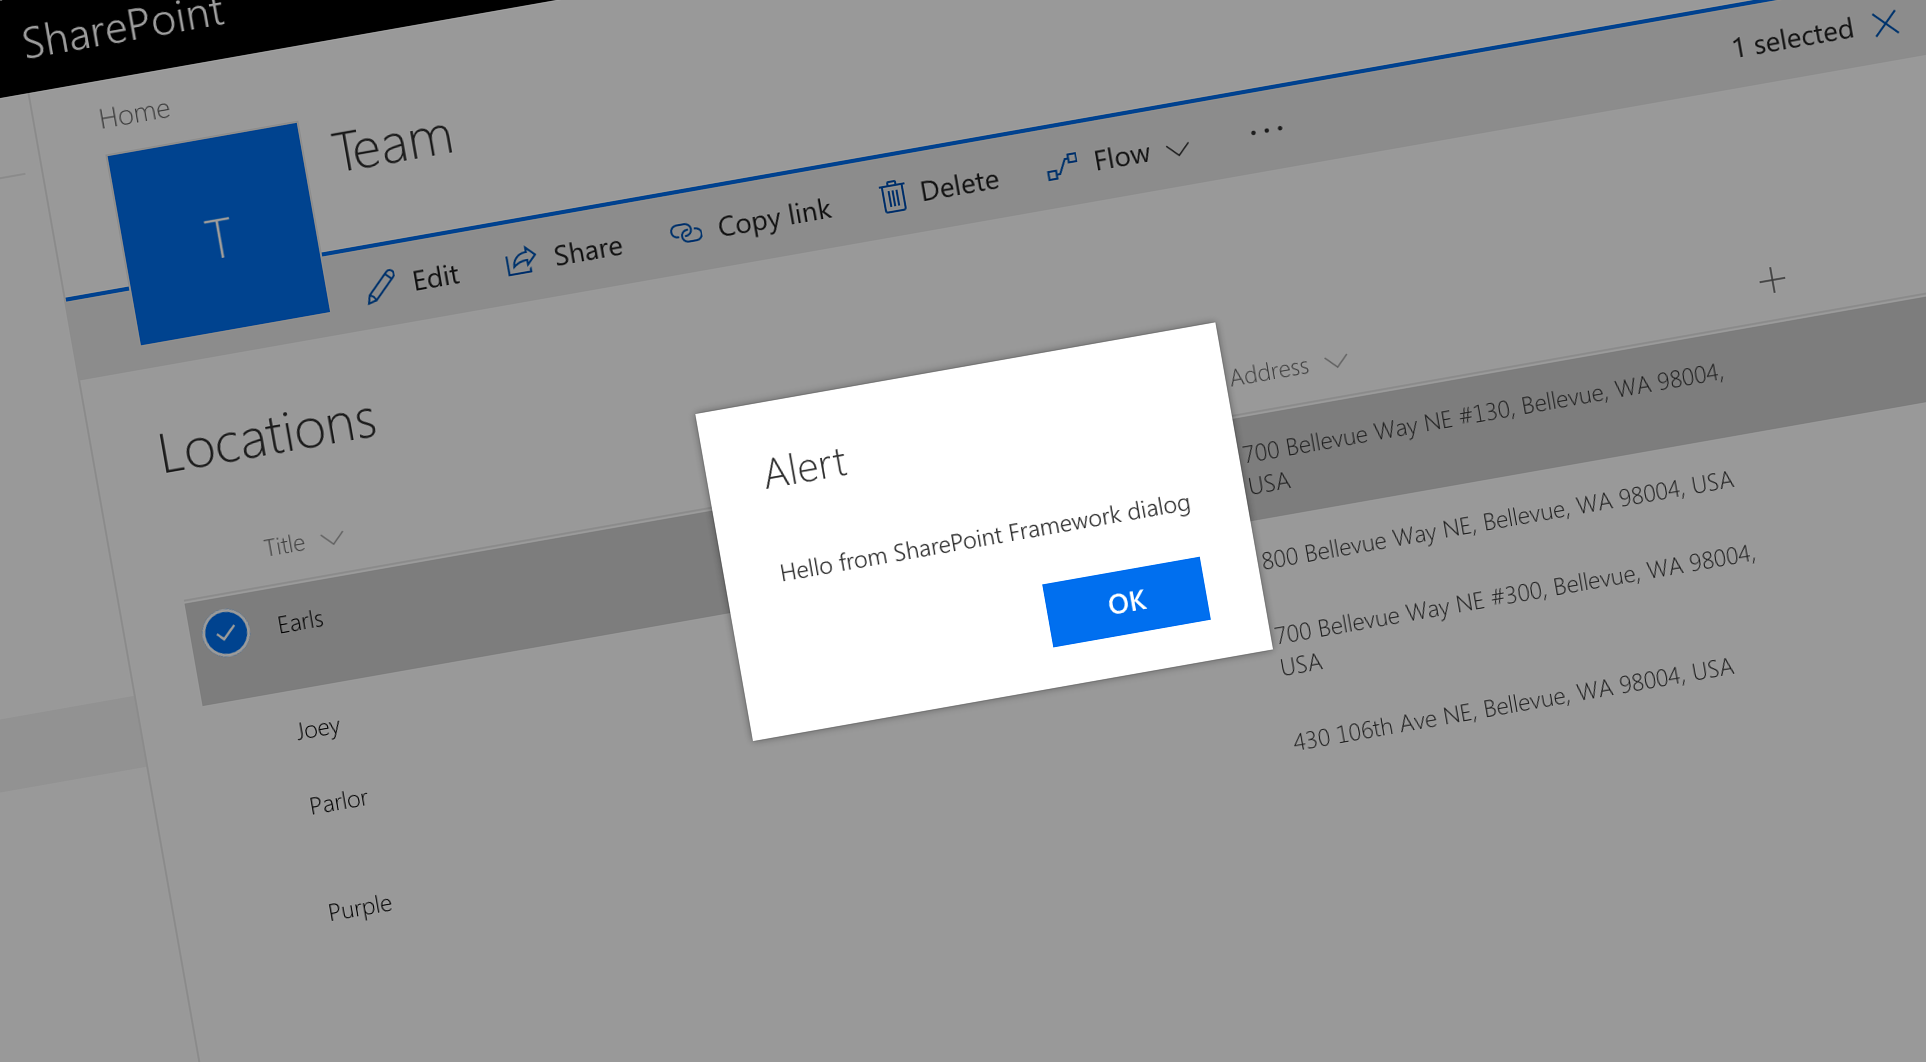 Temporary workaround for working with SharePoint Framework dialogs